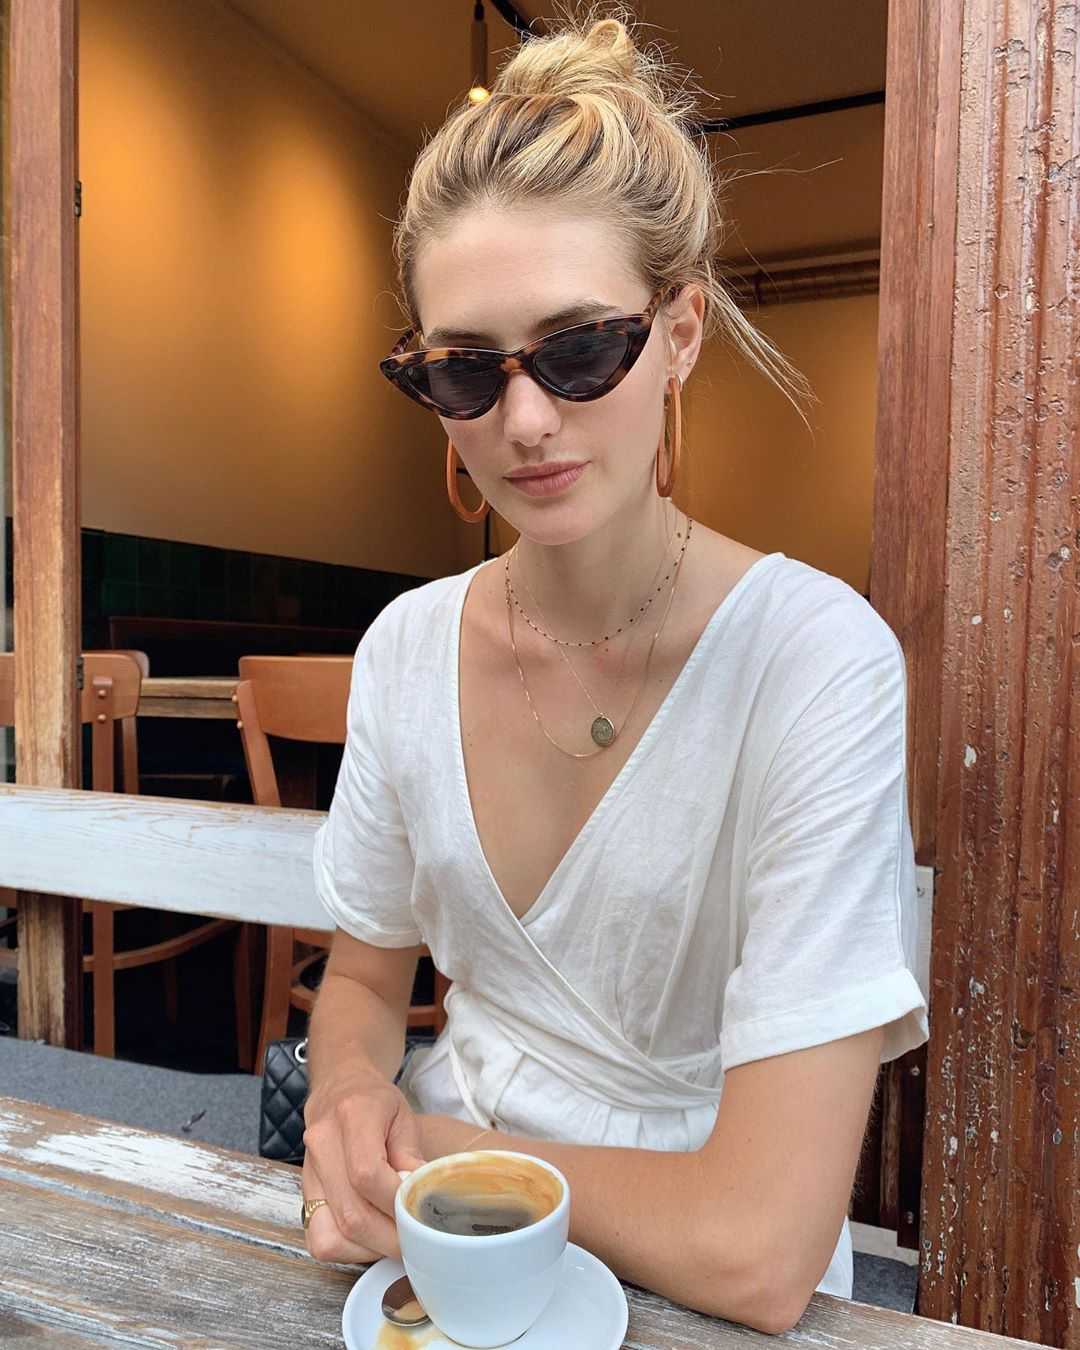 51 Hot Pictures Of Sanne Vloet Will Make You Gaze The Screen For Quite A Long Time | Best Of Comic Books